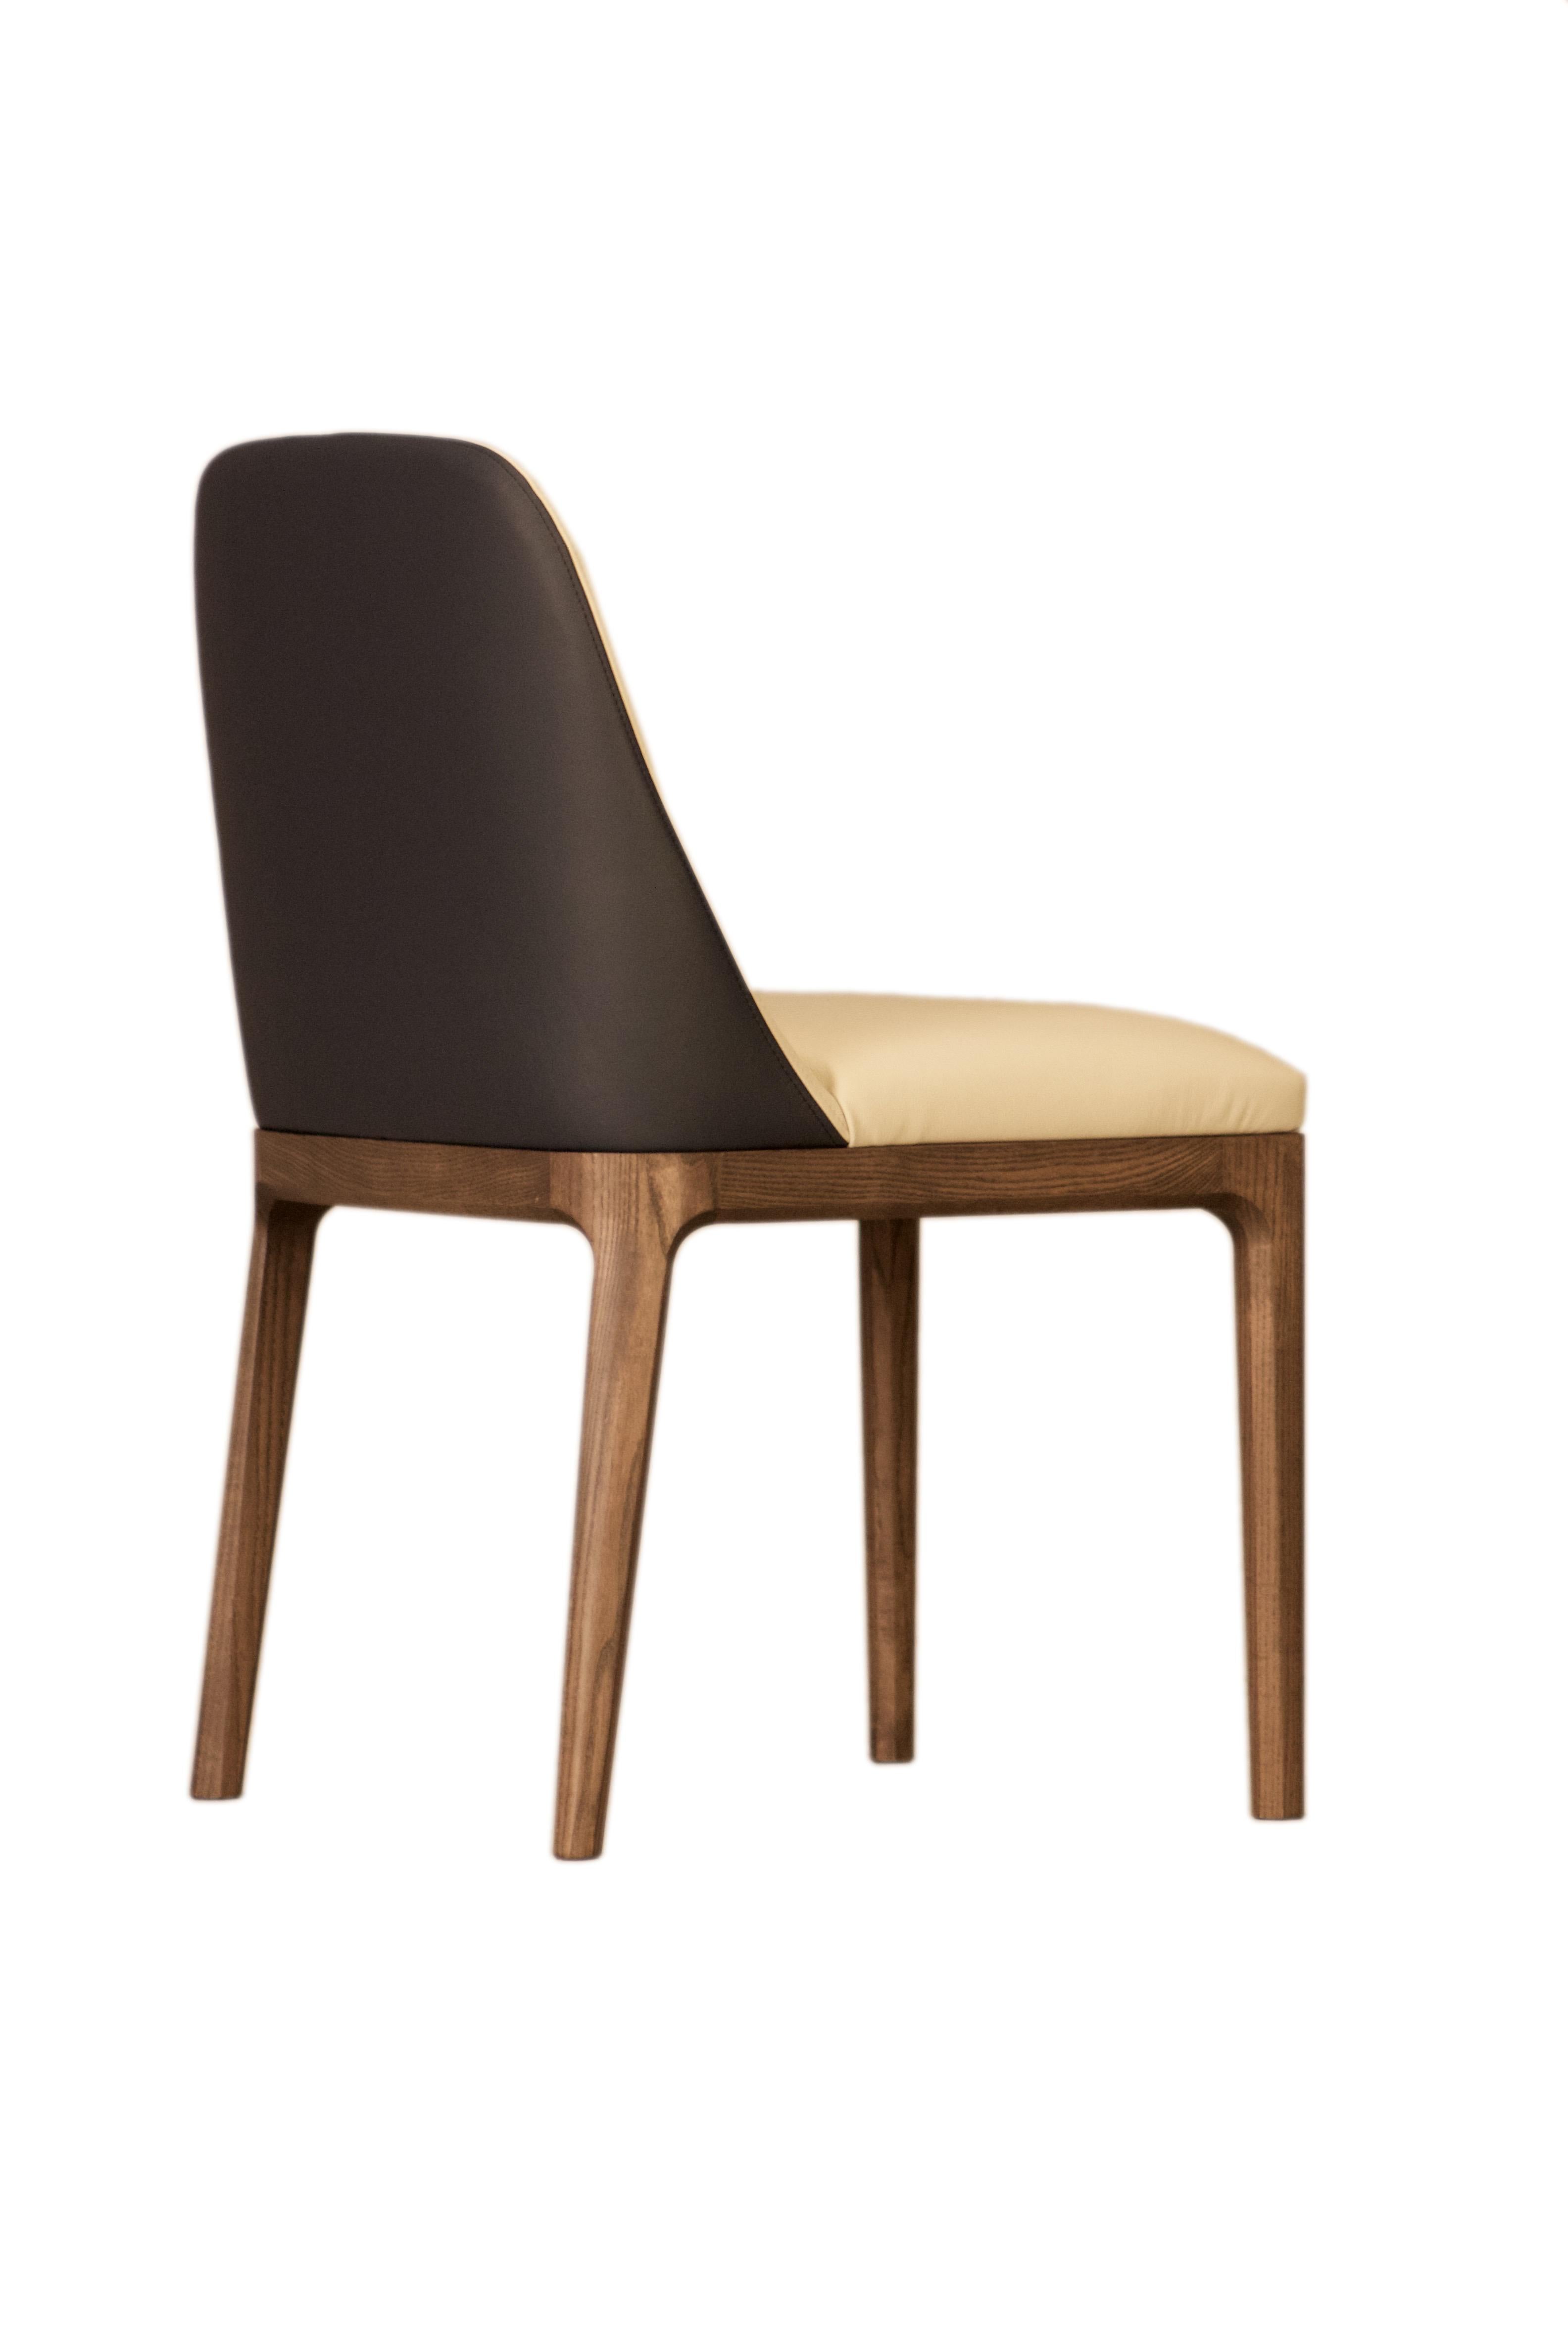 Contemporary style Bellagio dining chair made of ashwood with leather or fabrics upholstered seat.
Design Libero Rutilo